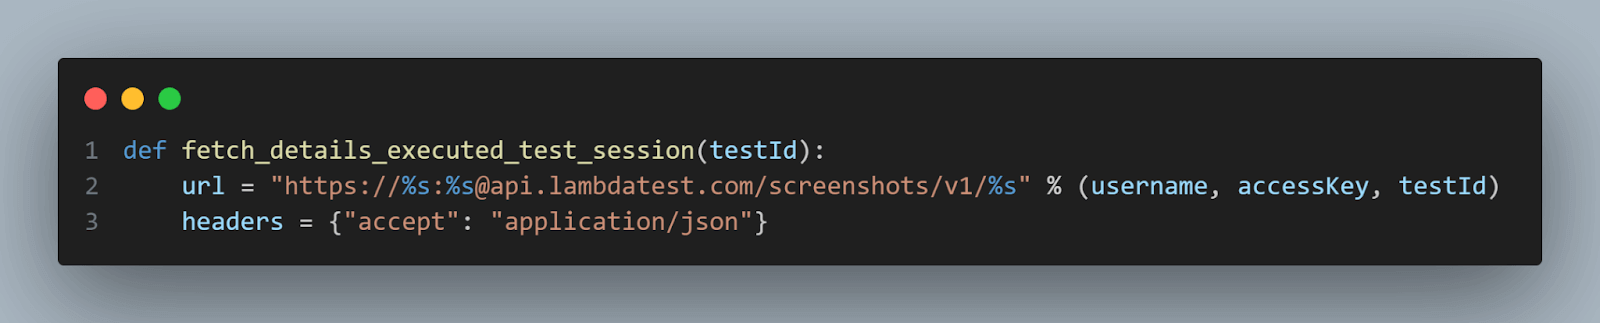 fetch_details_executed_test_session()